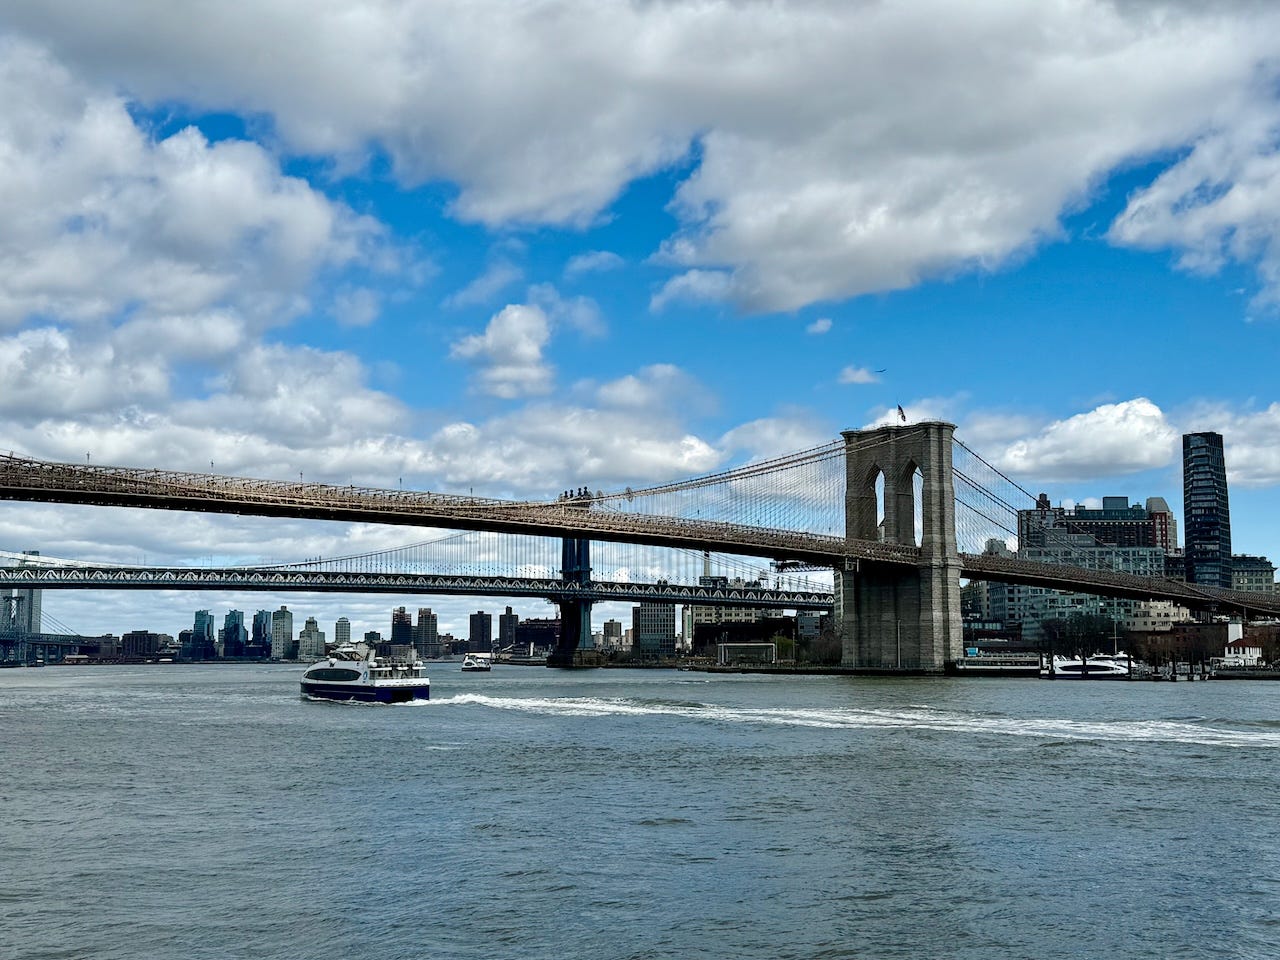 The world has changed all around us, but the Brooklyn Bridge still stands (Photo: Oliver Bouchard)